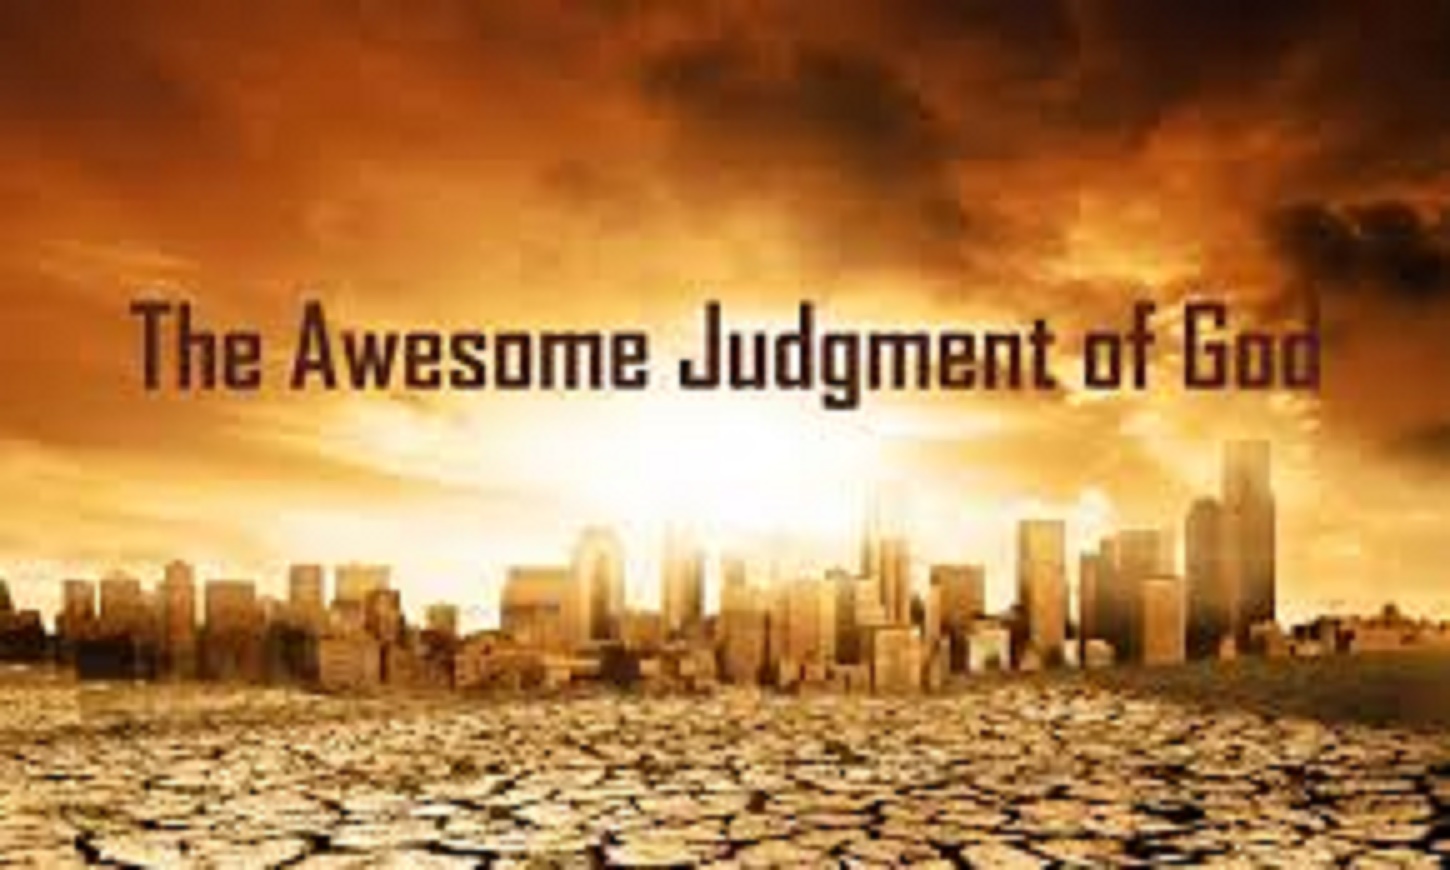 THE AWESOME JUDGMENT OF GOD